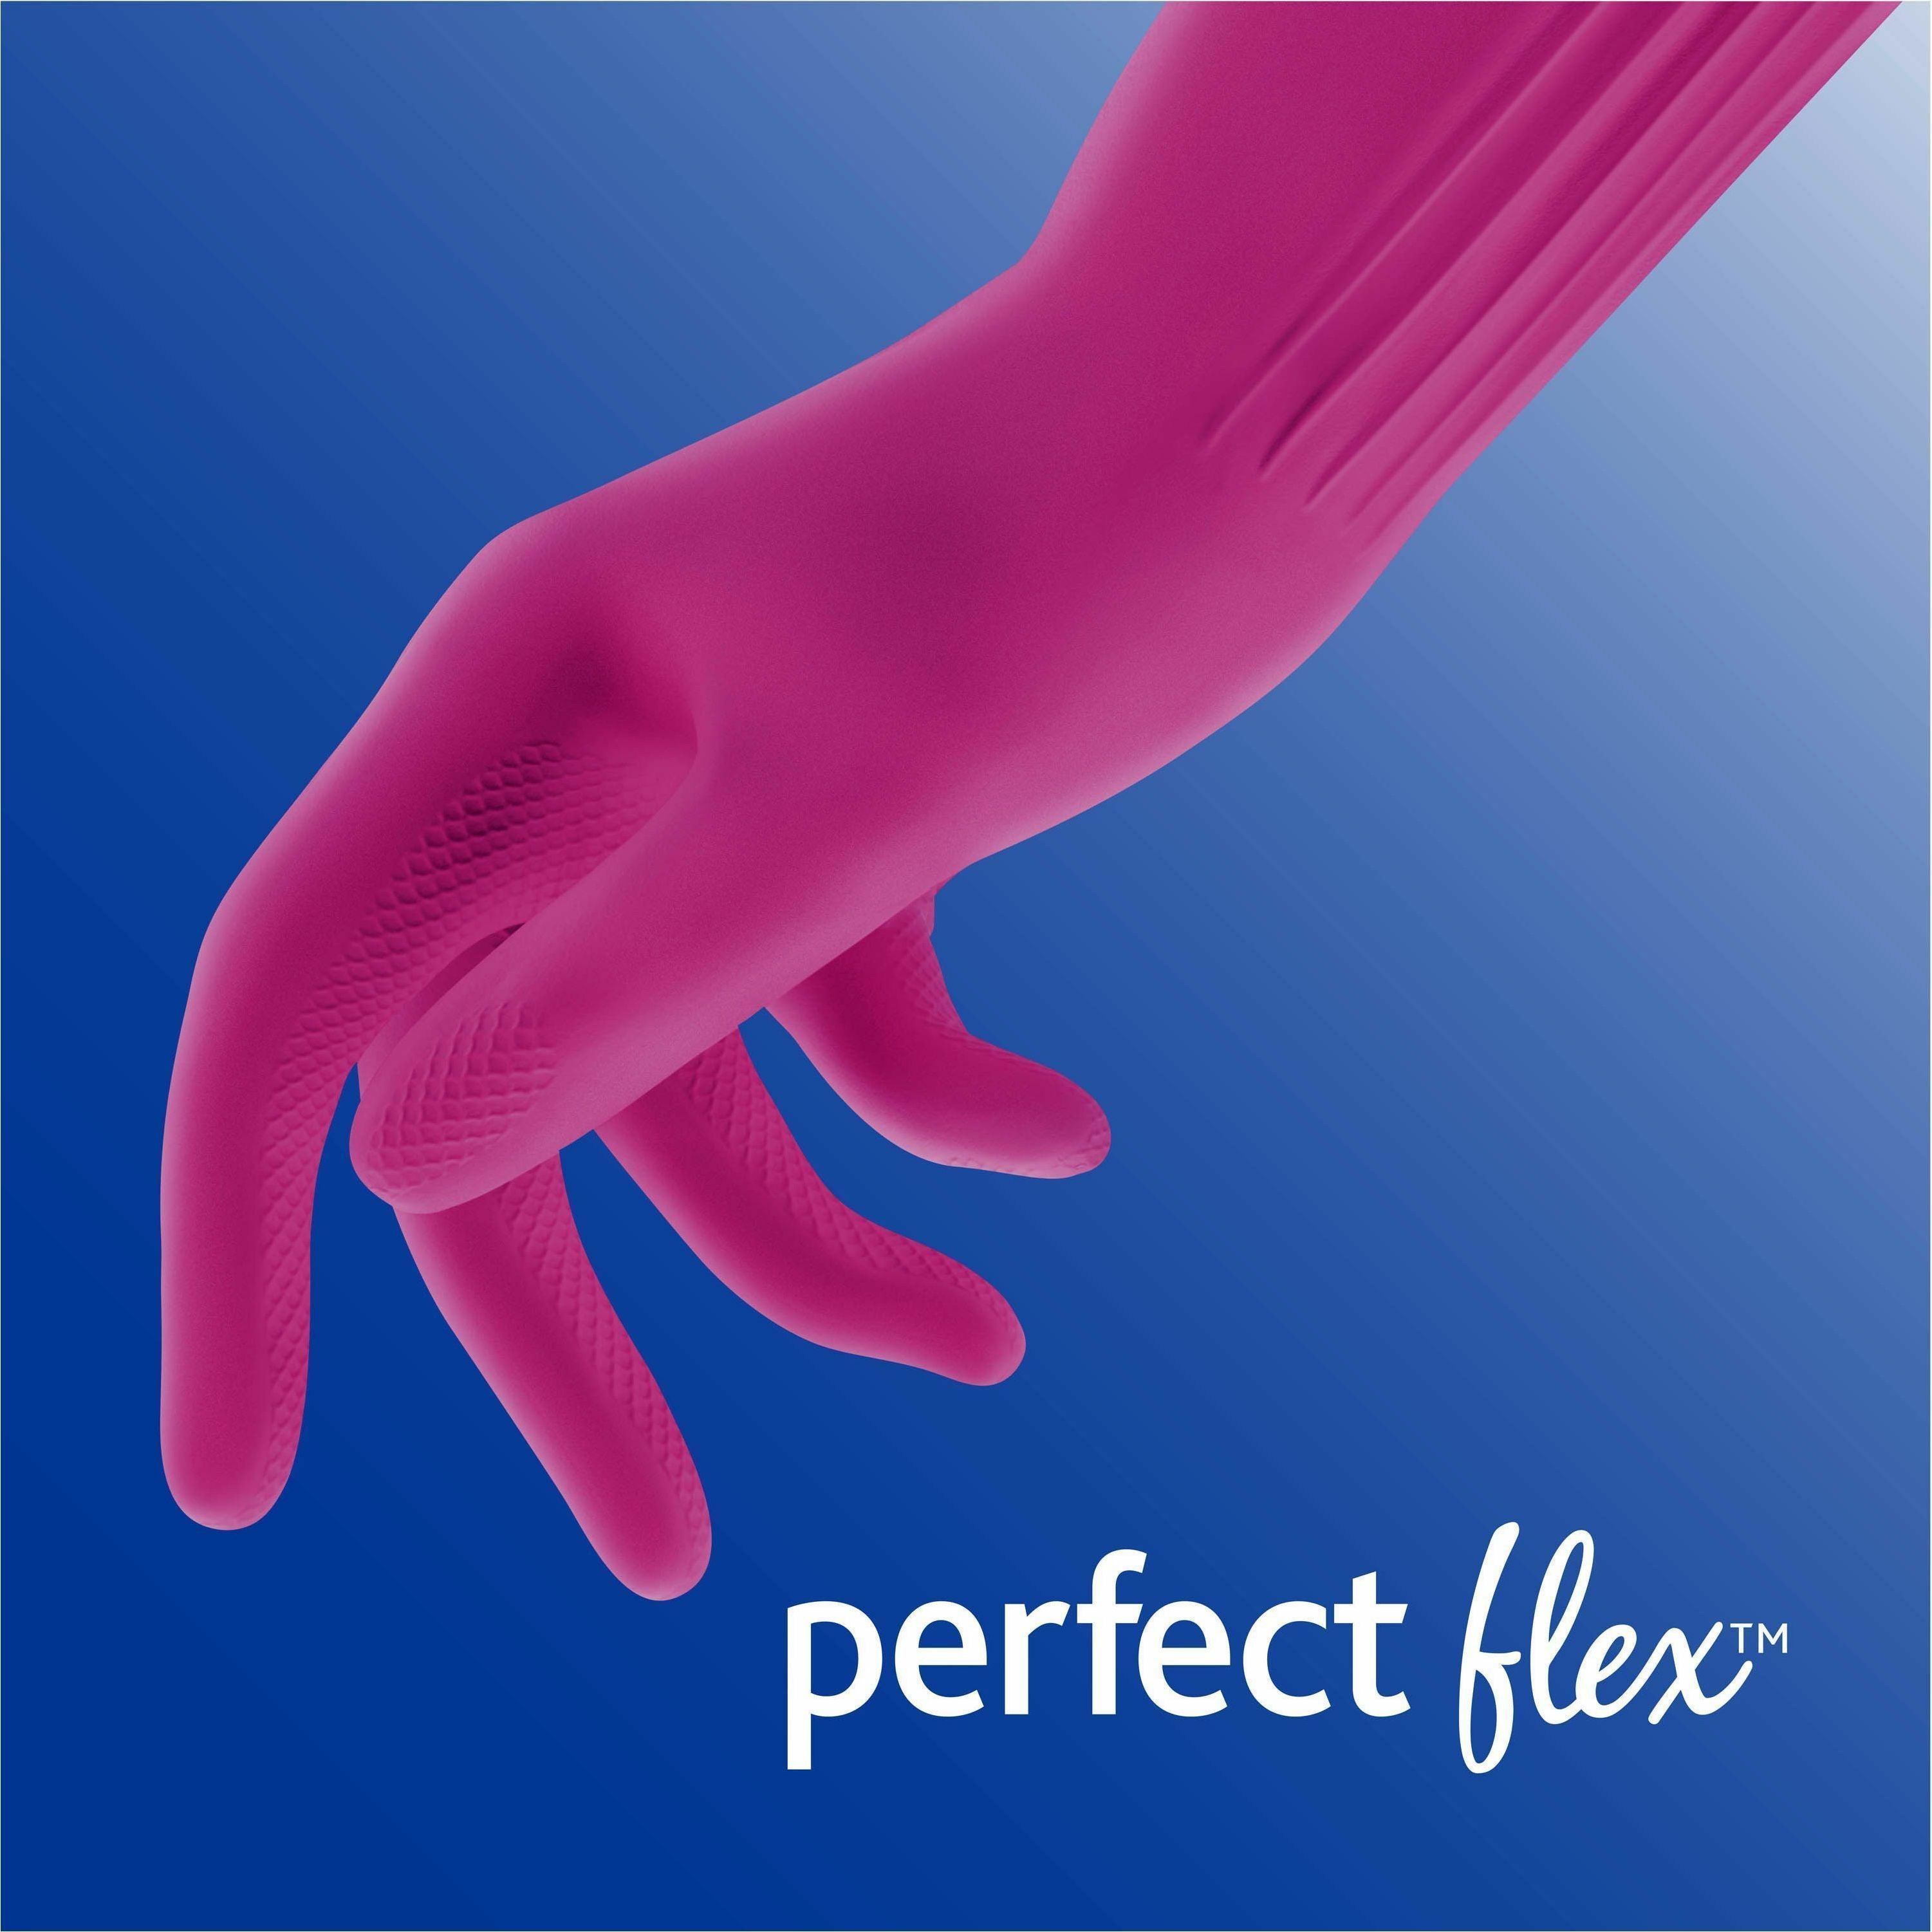 o-cedar-playtex-living-gloves-chemical-bacteria-protection-medium-size-latex-neoprene-nitrile-pink-anti-microbial-reusable-durable-comfortable-odor-resistant-textured-palm-textured-fingertip-for-household-cleaning-2-pair-1_fhp166119 - 5